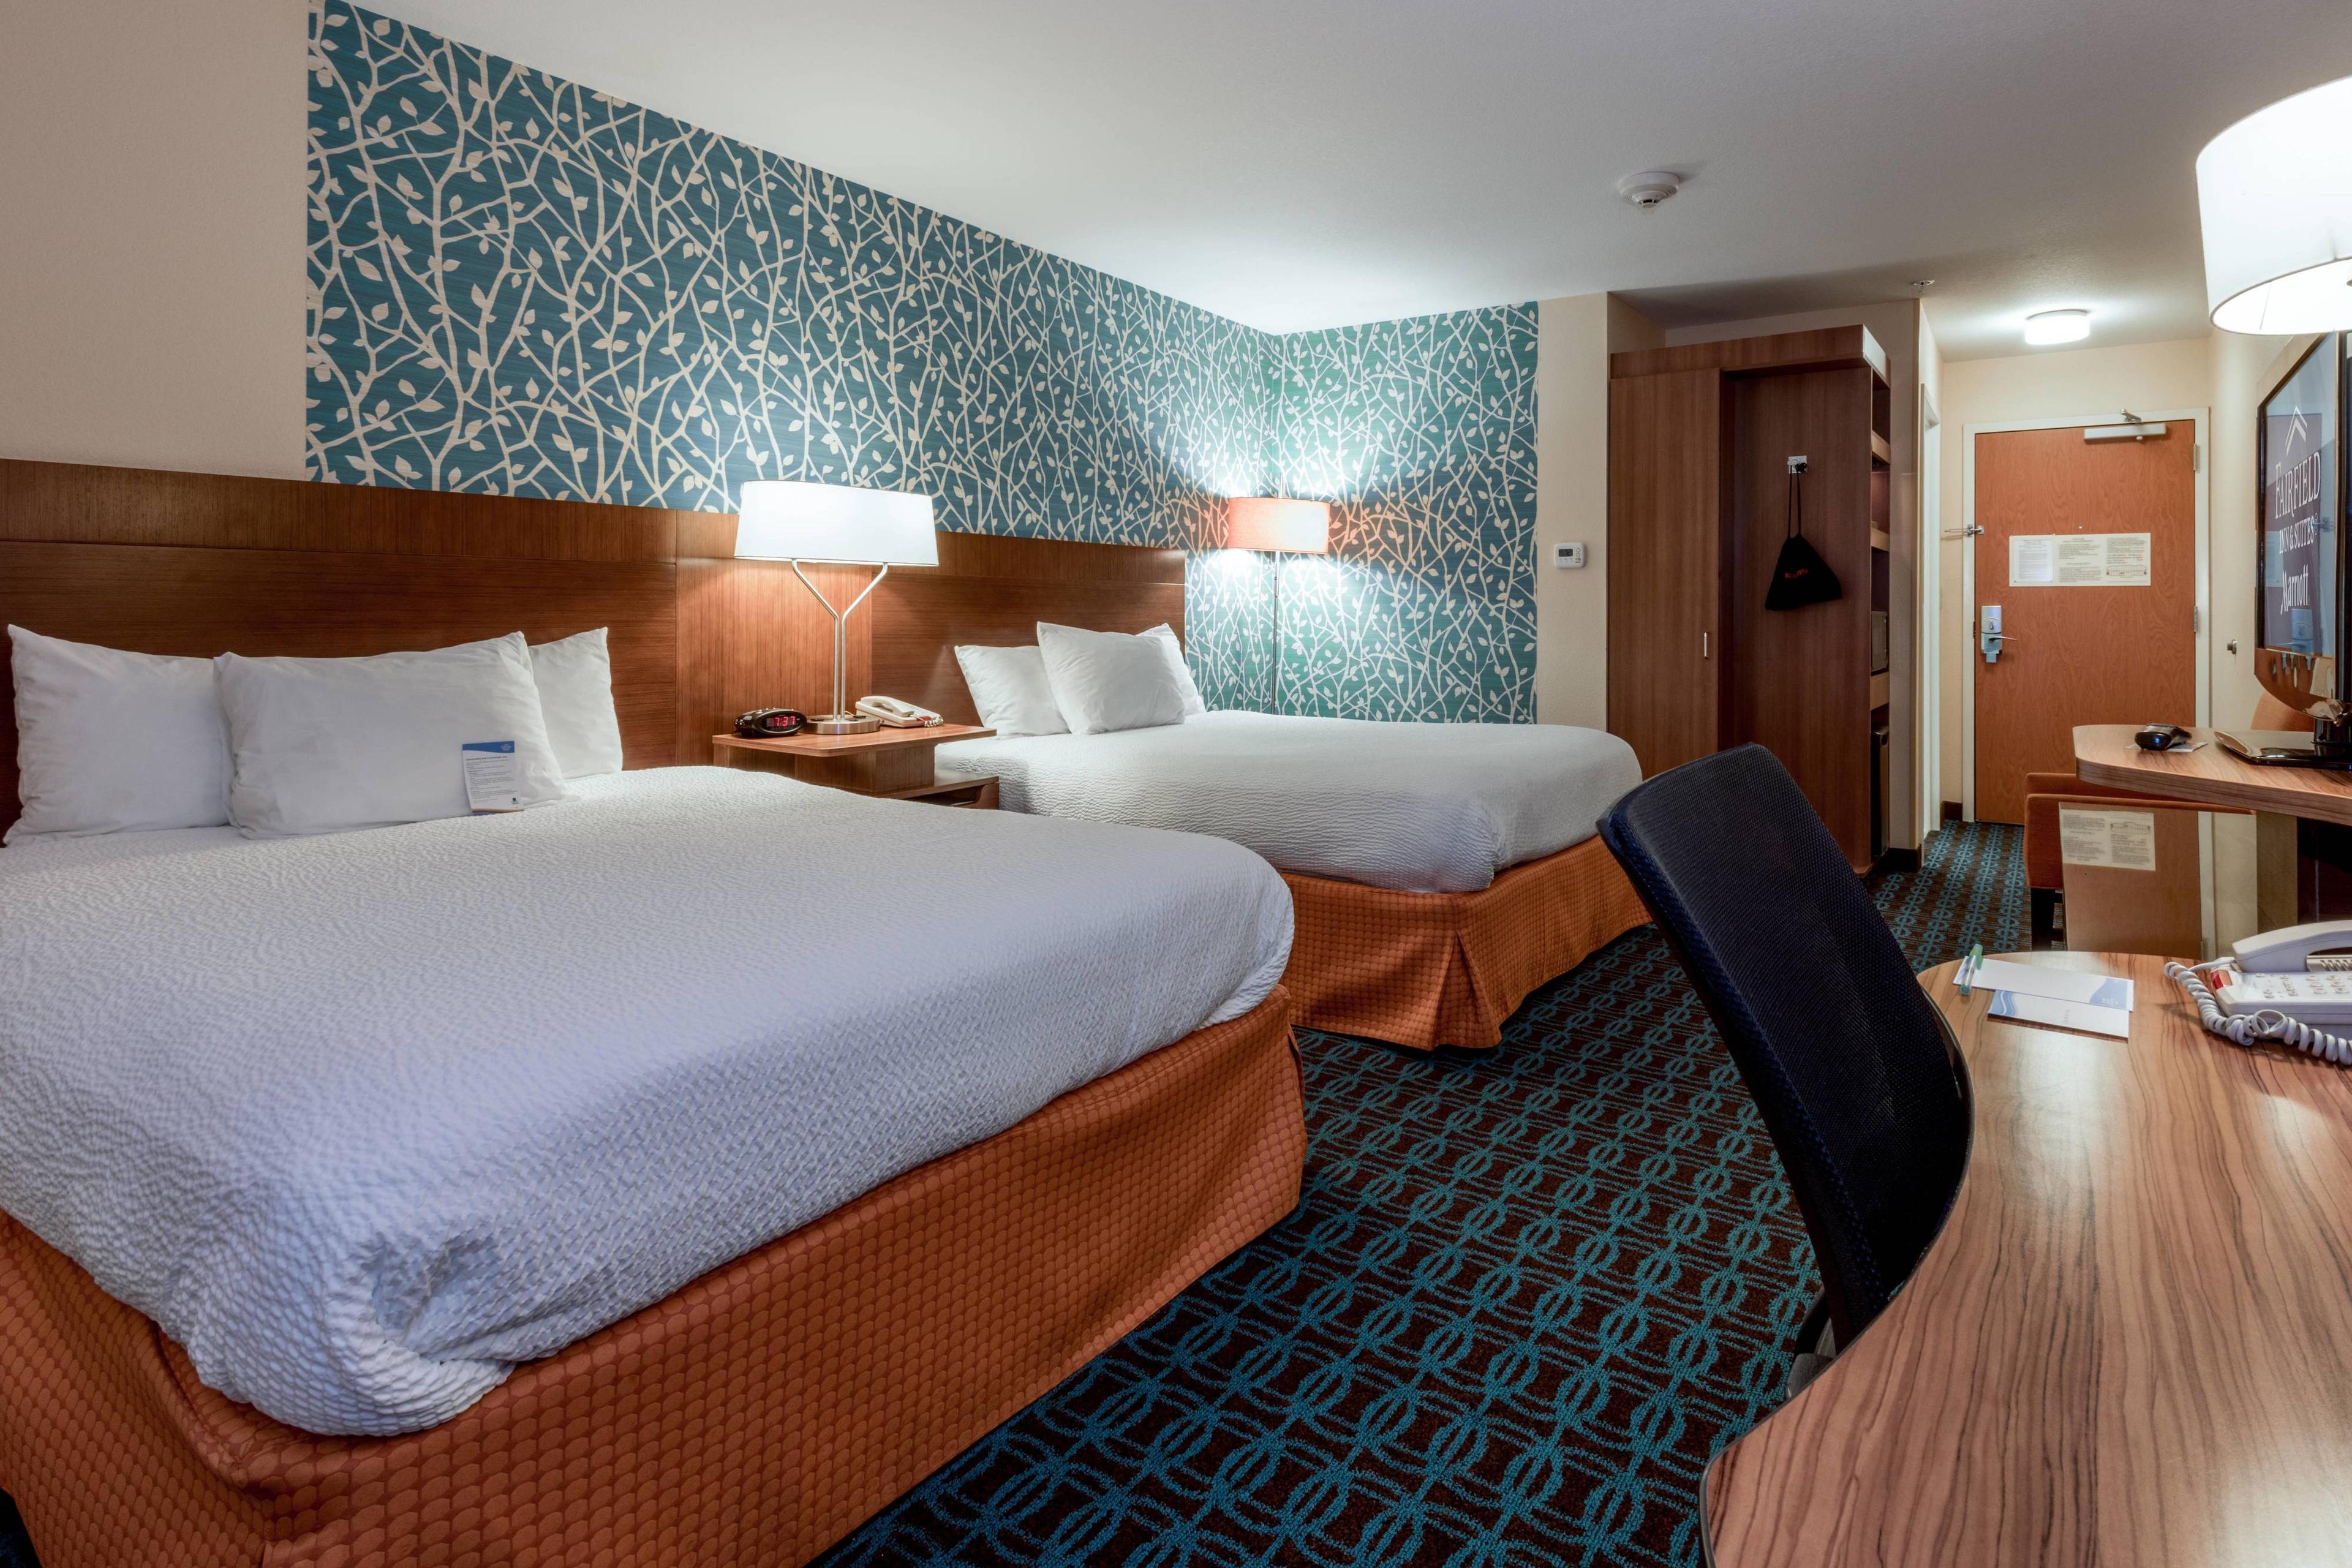 We offer our guests traveling with a companion guest rooms with two queen-size beds.